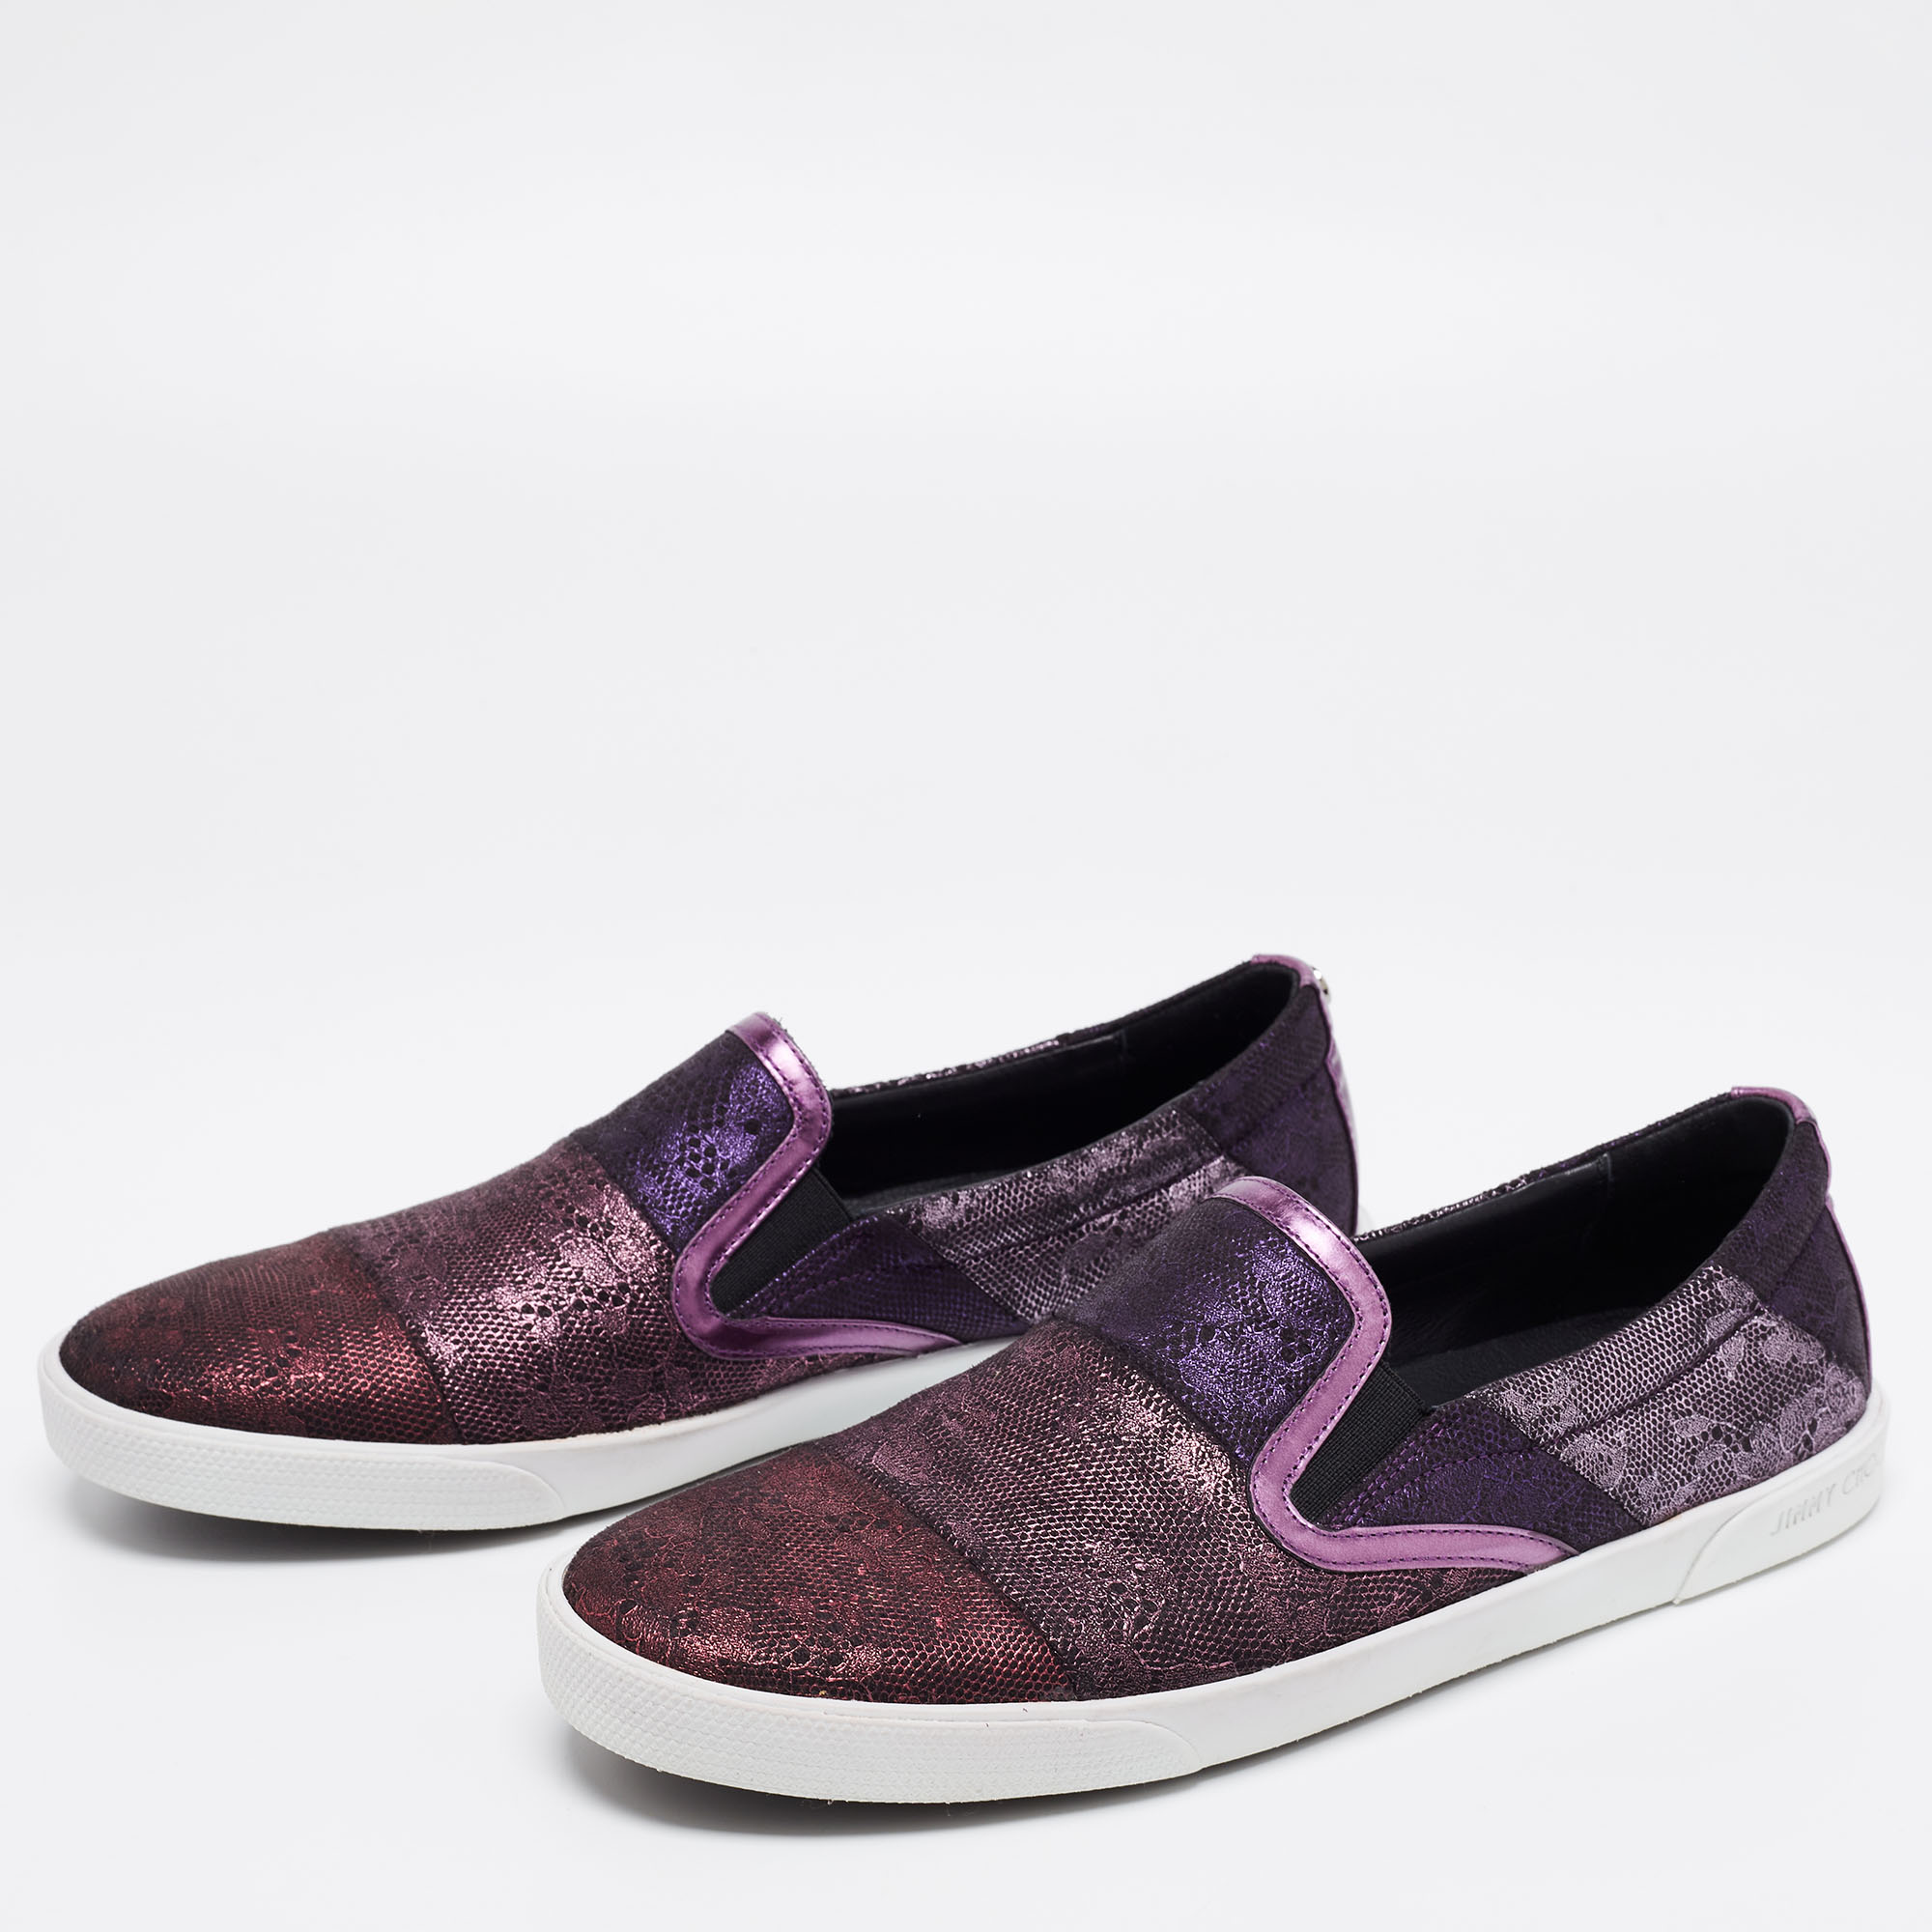 

Jimmy Choo Metallic Purple Lace and Leather Demi Slip-On Sneakers Size